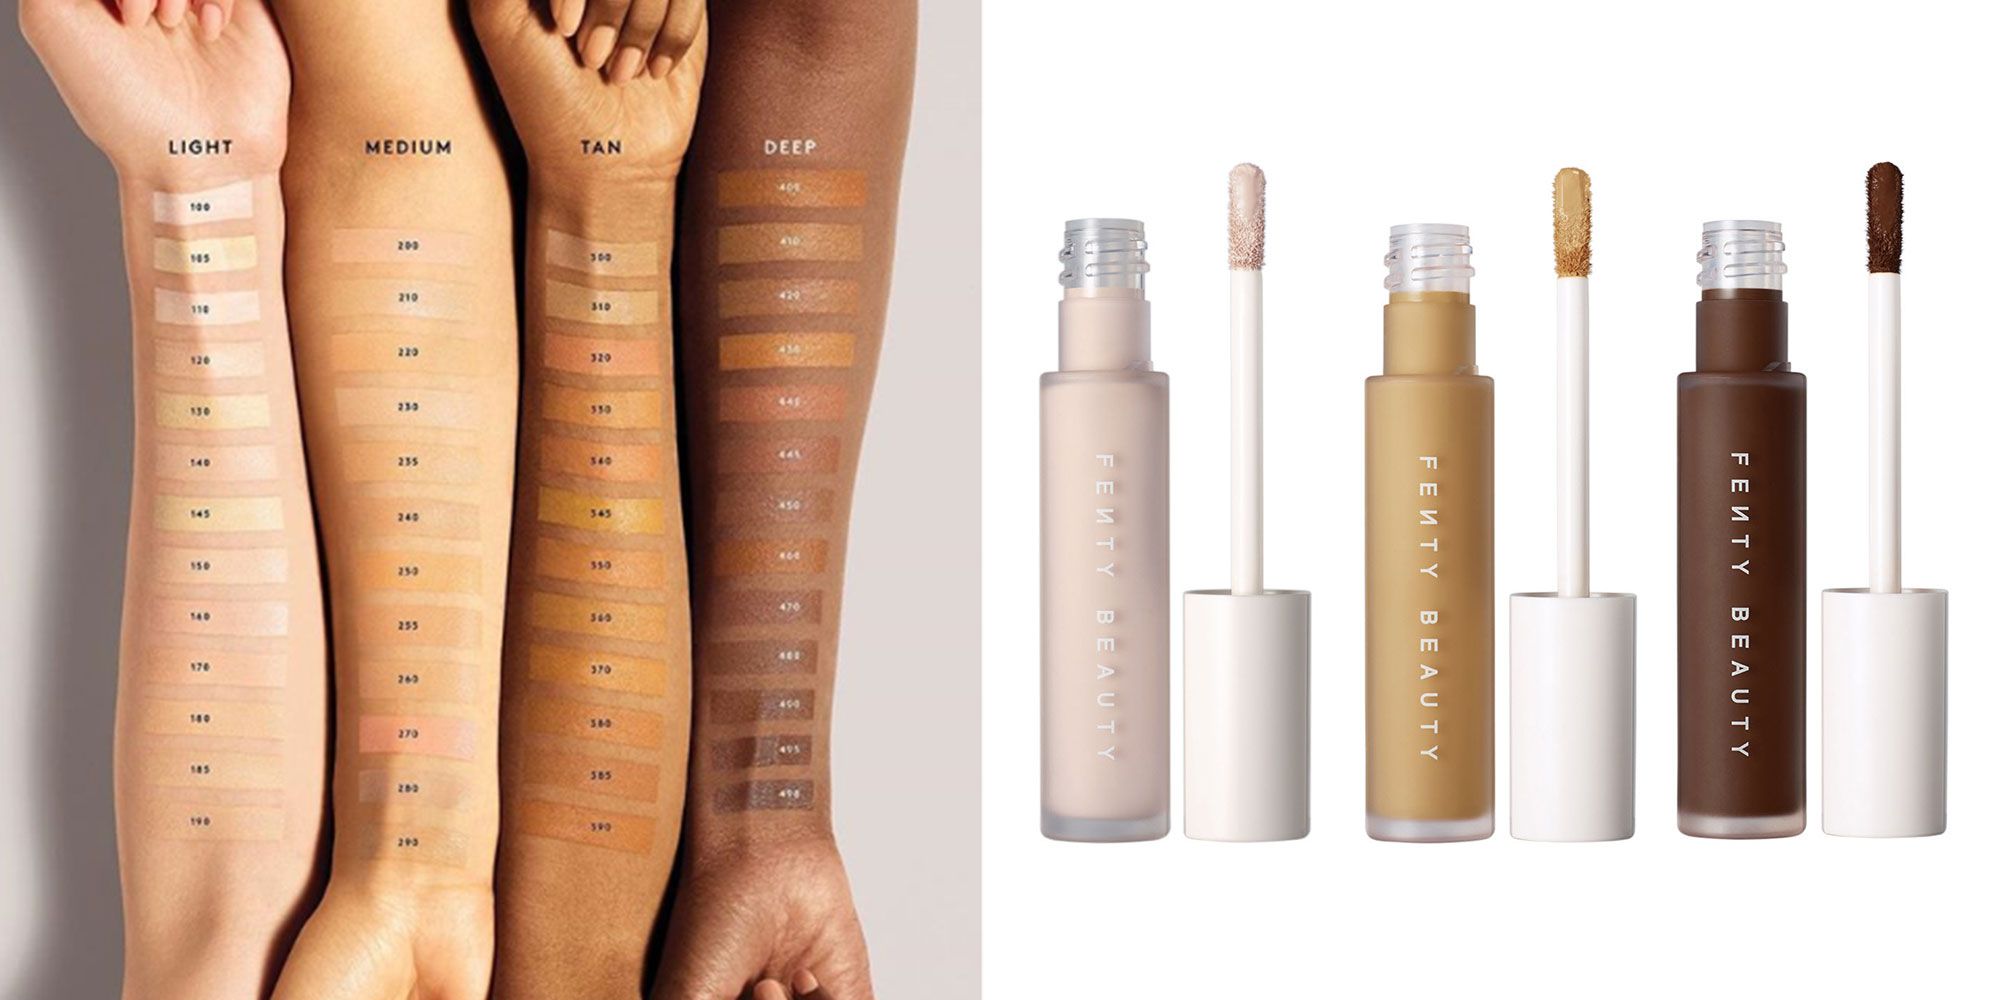 zone flydende Tænke Fenty Beauty Launches New Pro Filt'r Concealers in 50 Shades